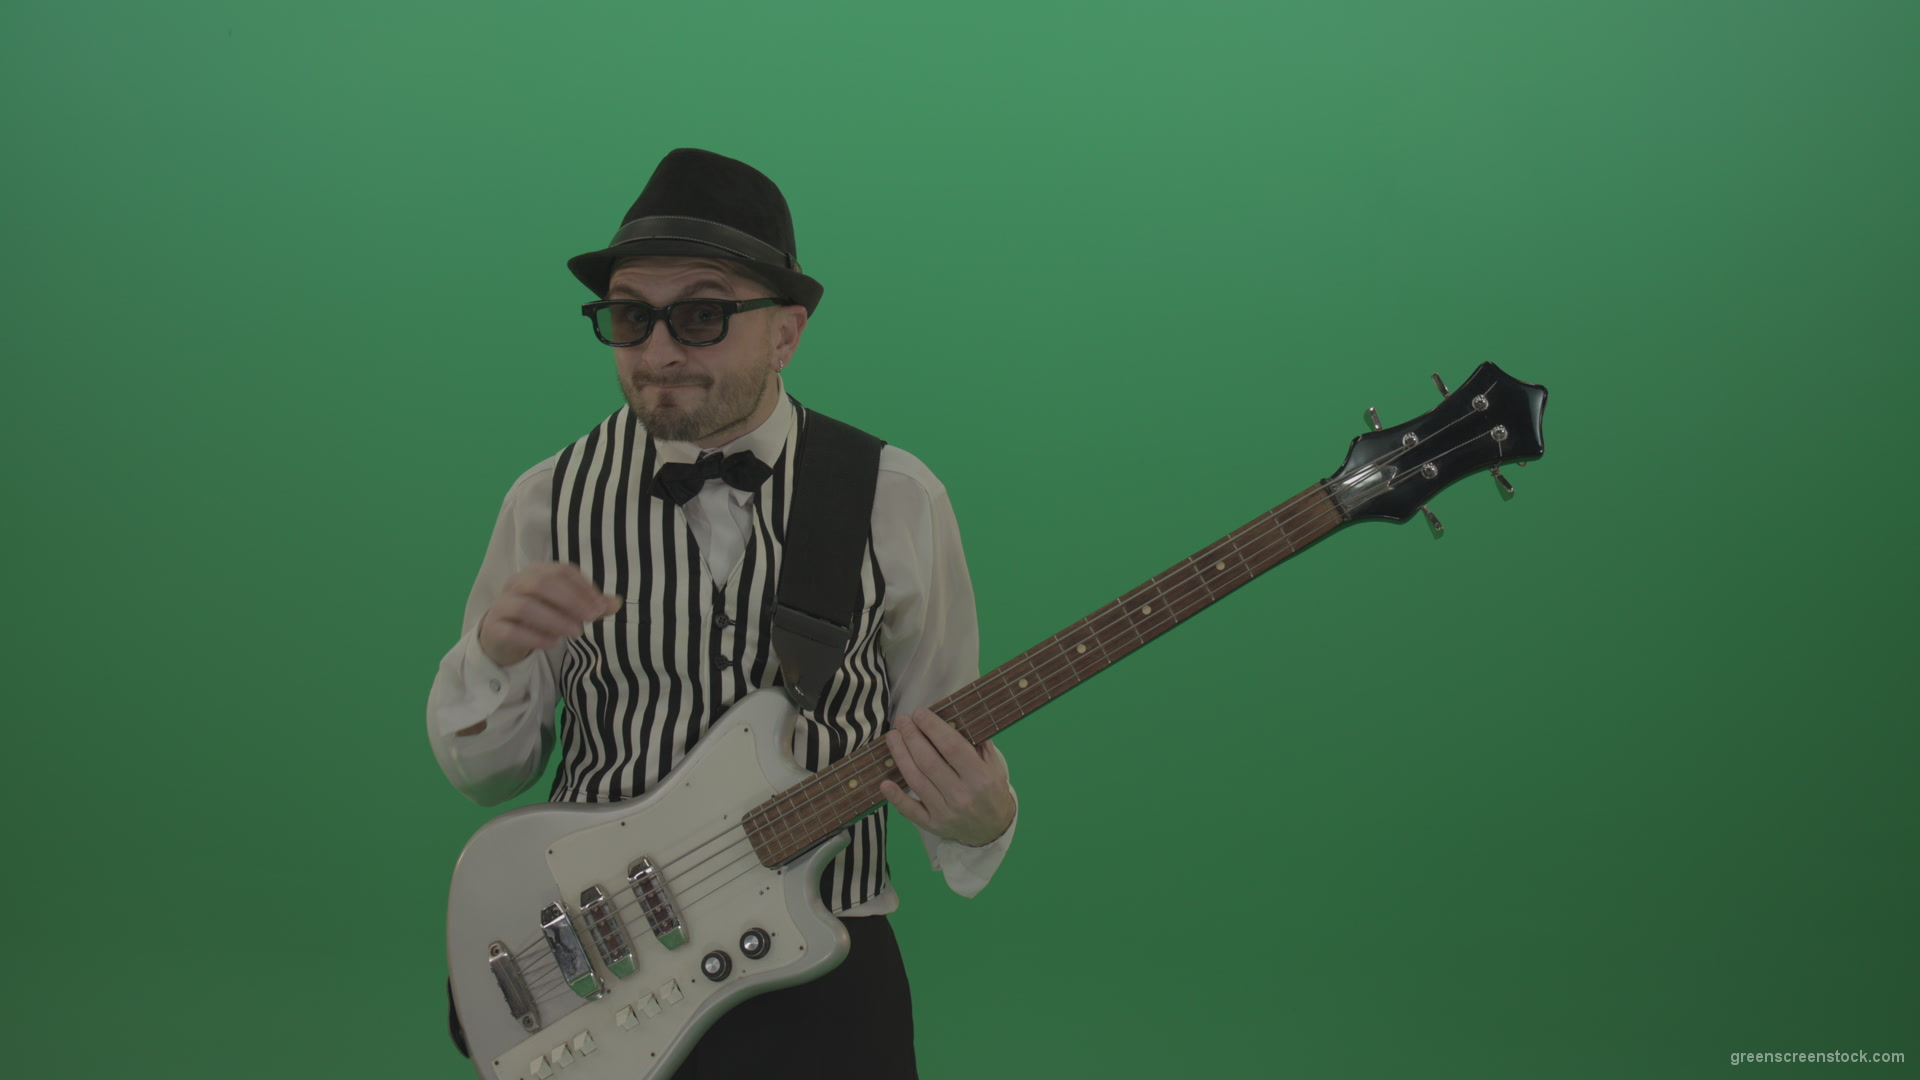 Guitar-player-browses-the-bass-guitar-playing-solo-and-charismatically-shows-facial-expressions_002 Green Screen Stock